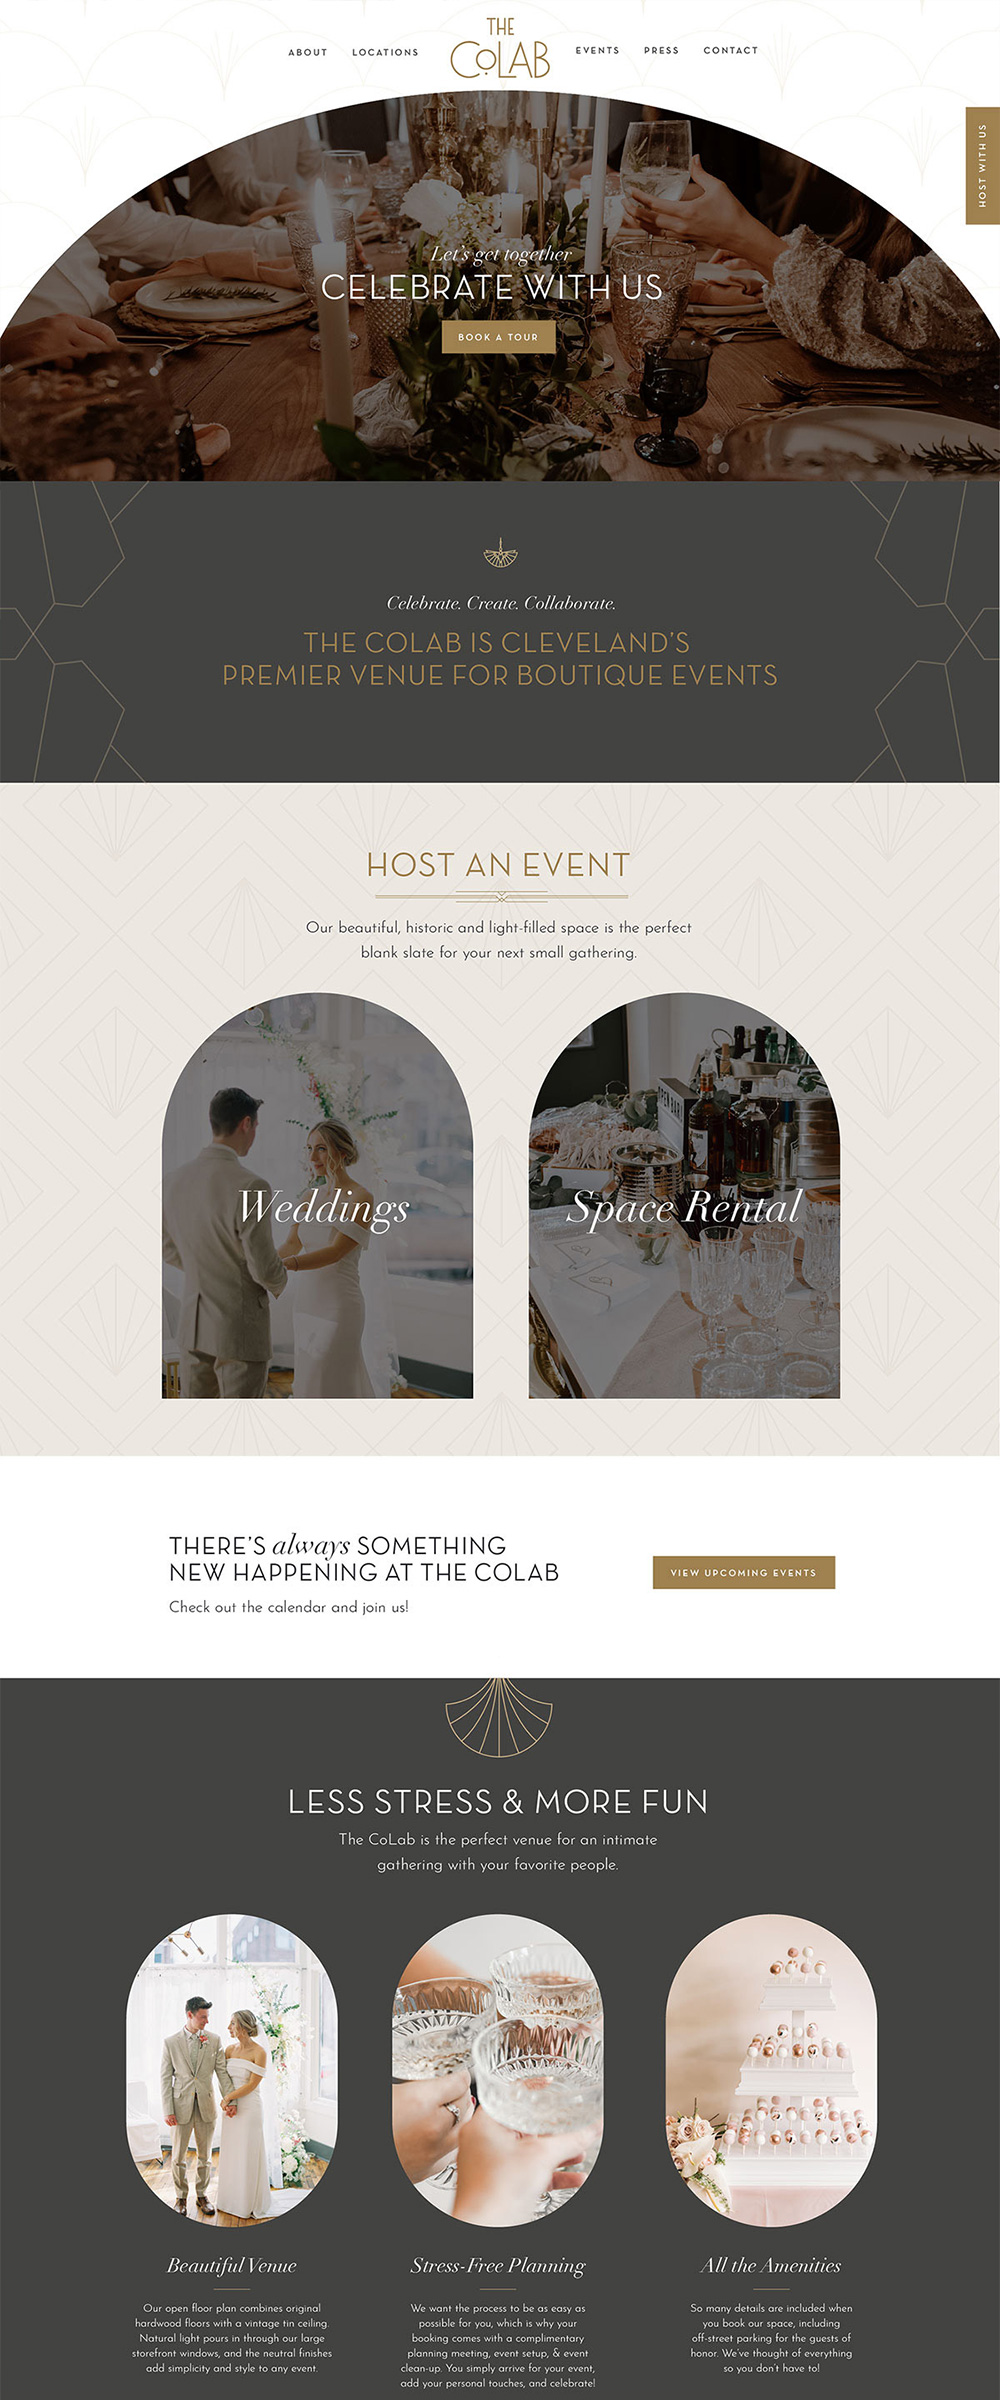 Website Design for an Event Rental Space | The CoLab - by Hey Hello Studio